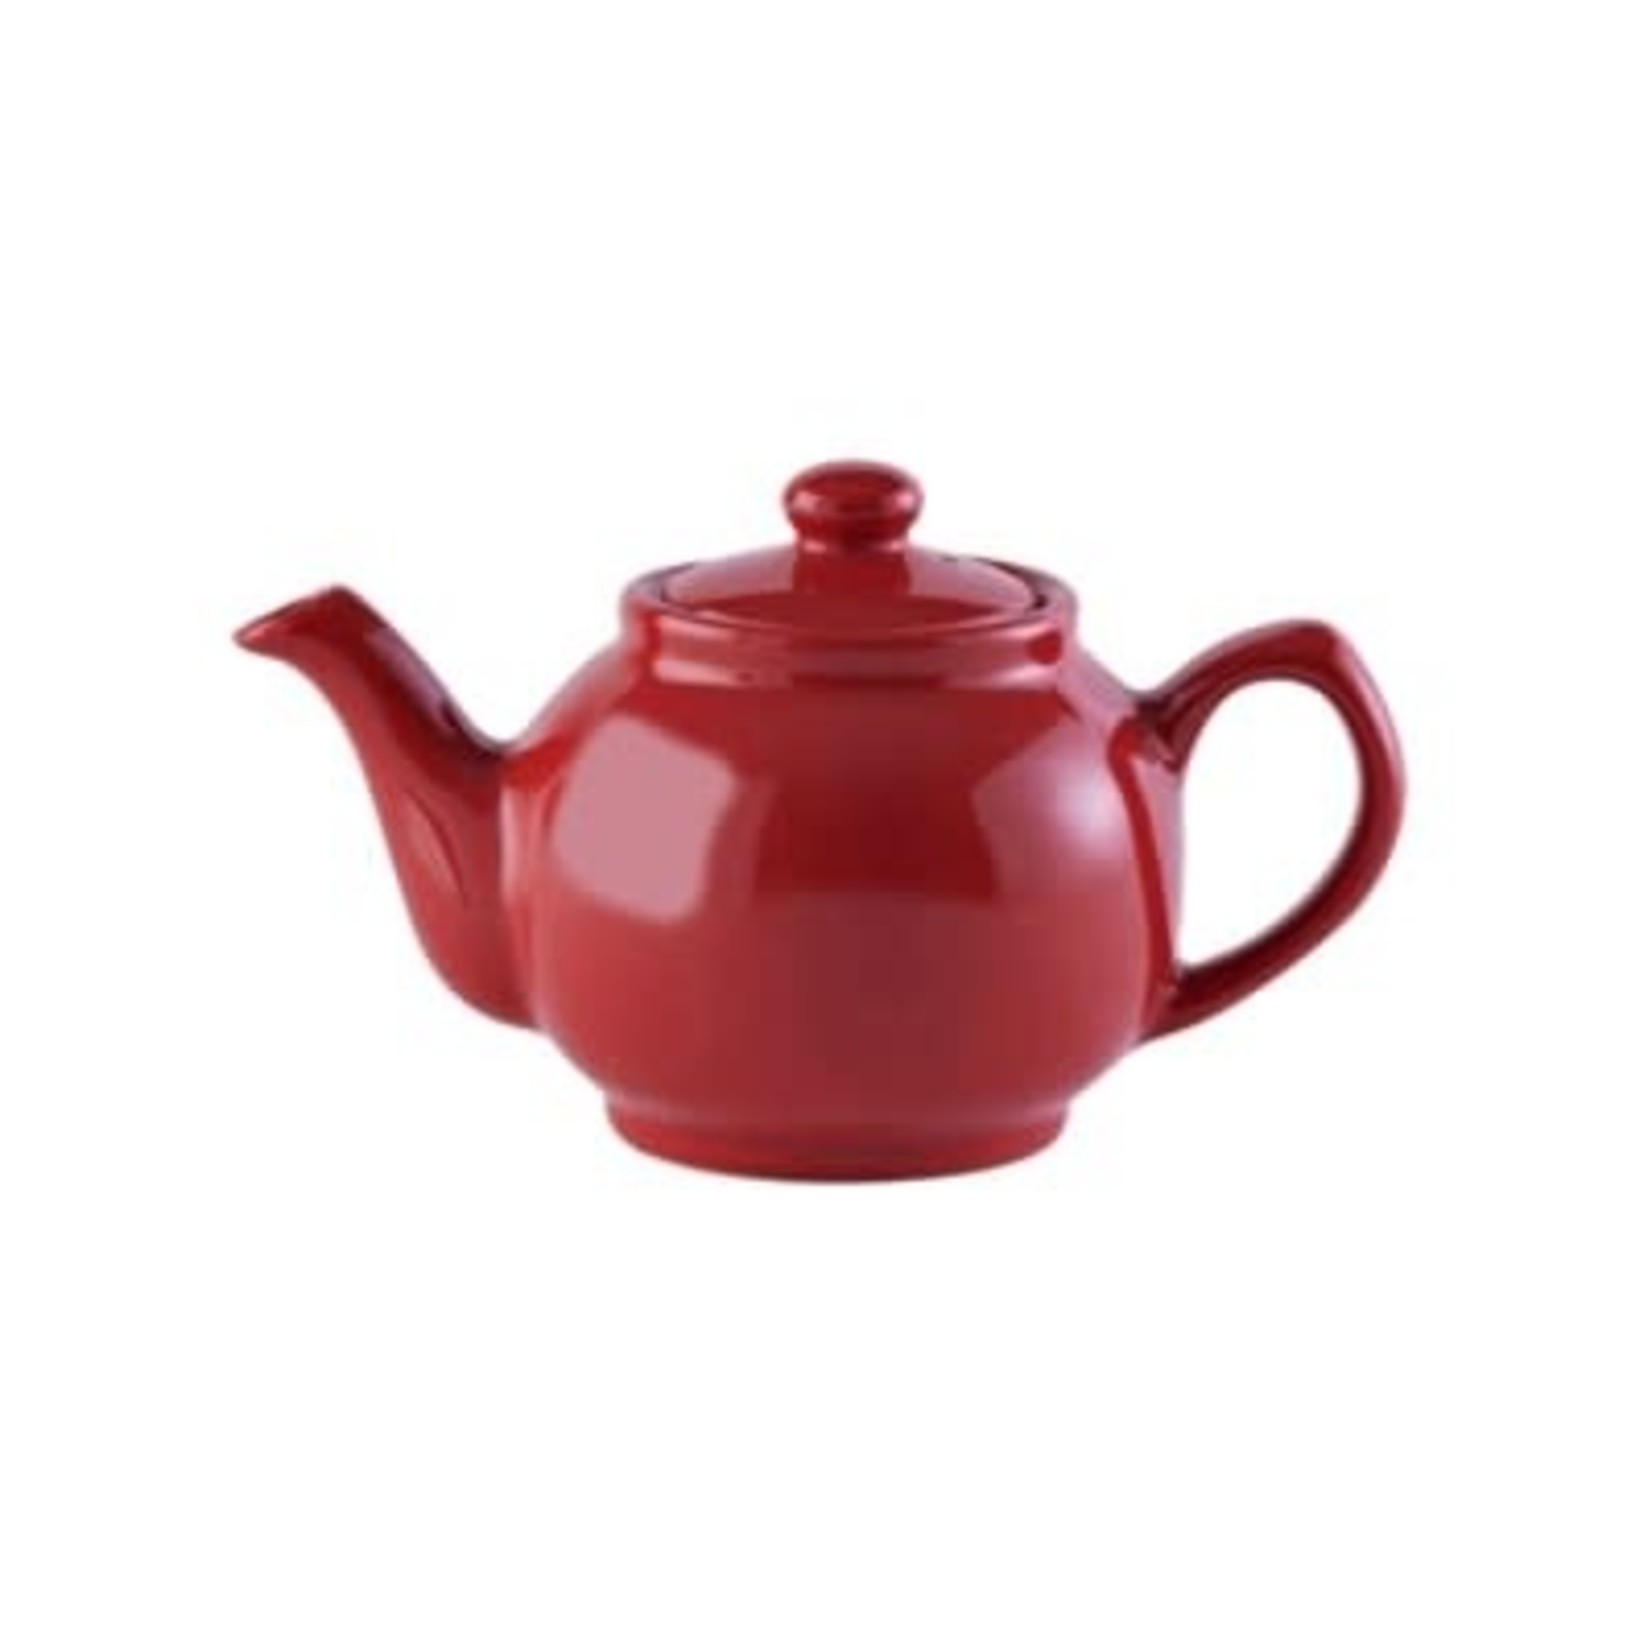 Brights Teapot Red 2 cup